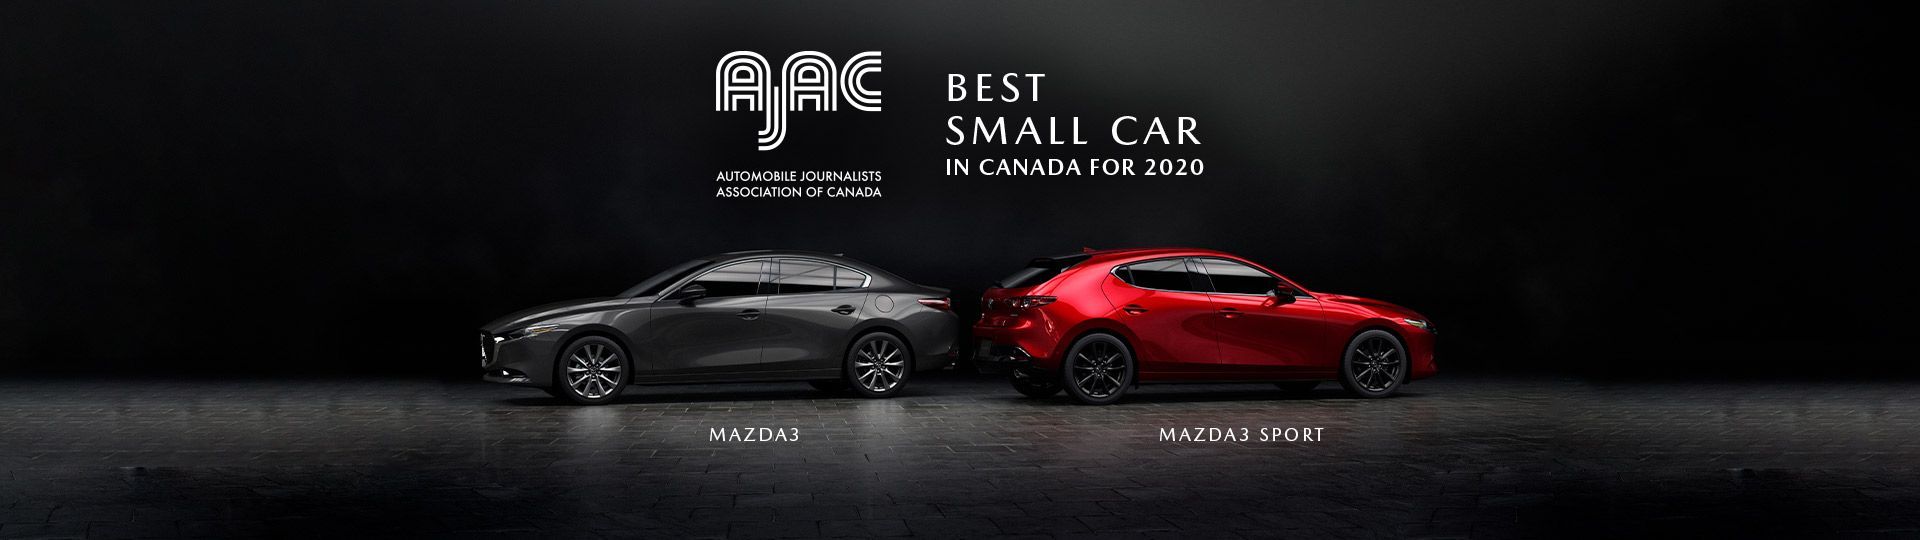 AJAC Best Small Car in Canada for 2020 - Proudly Presenting, the Mazda3 & Mazda3 Sport!